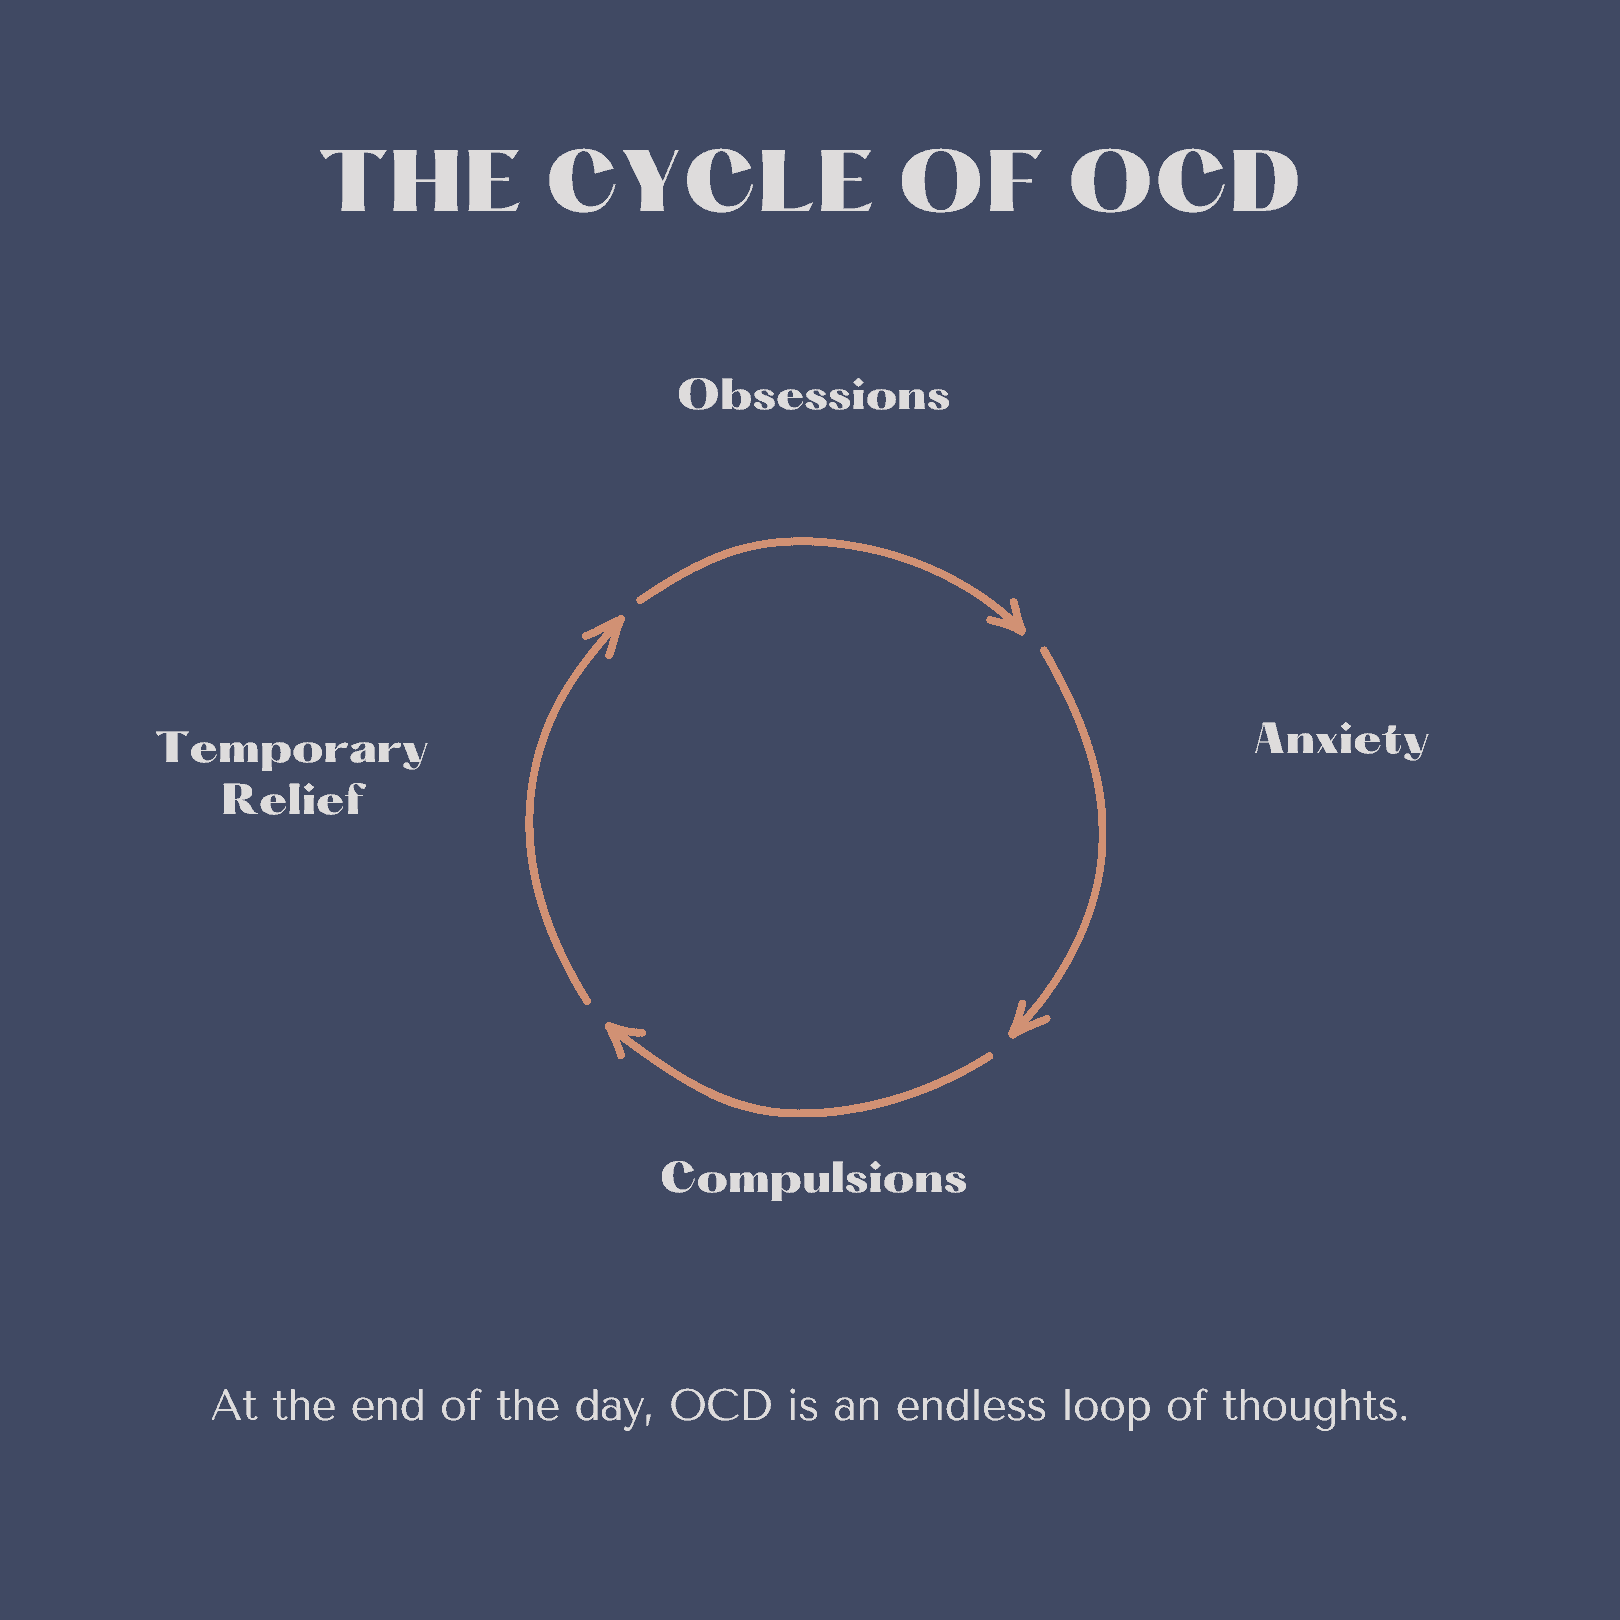 An illustration of the ocd cycle